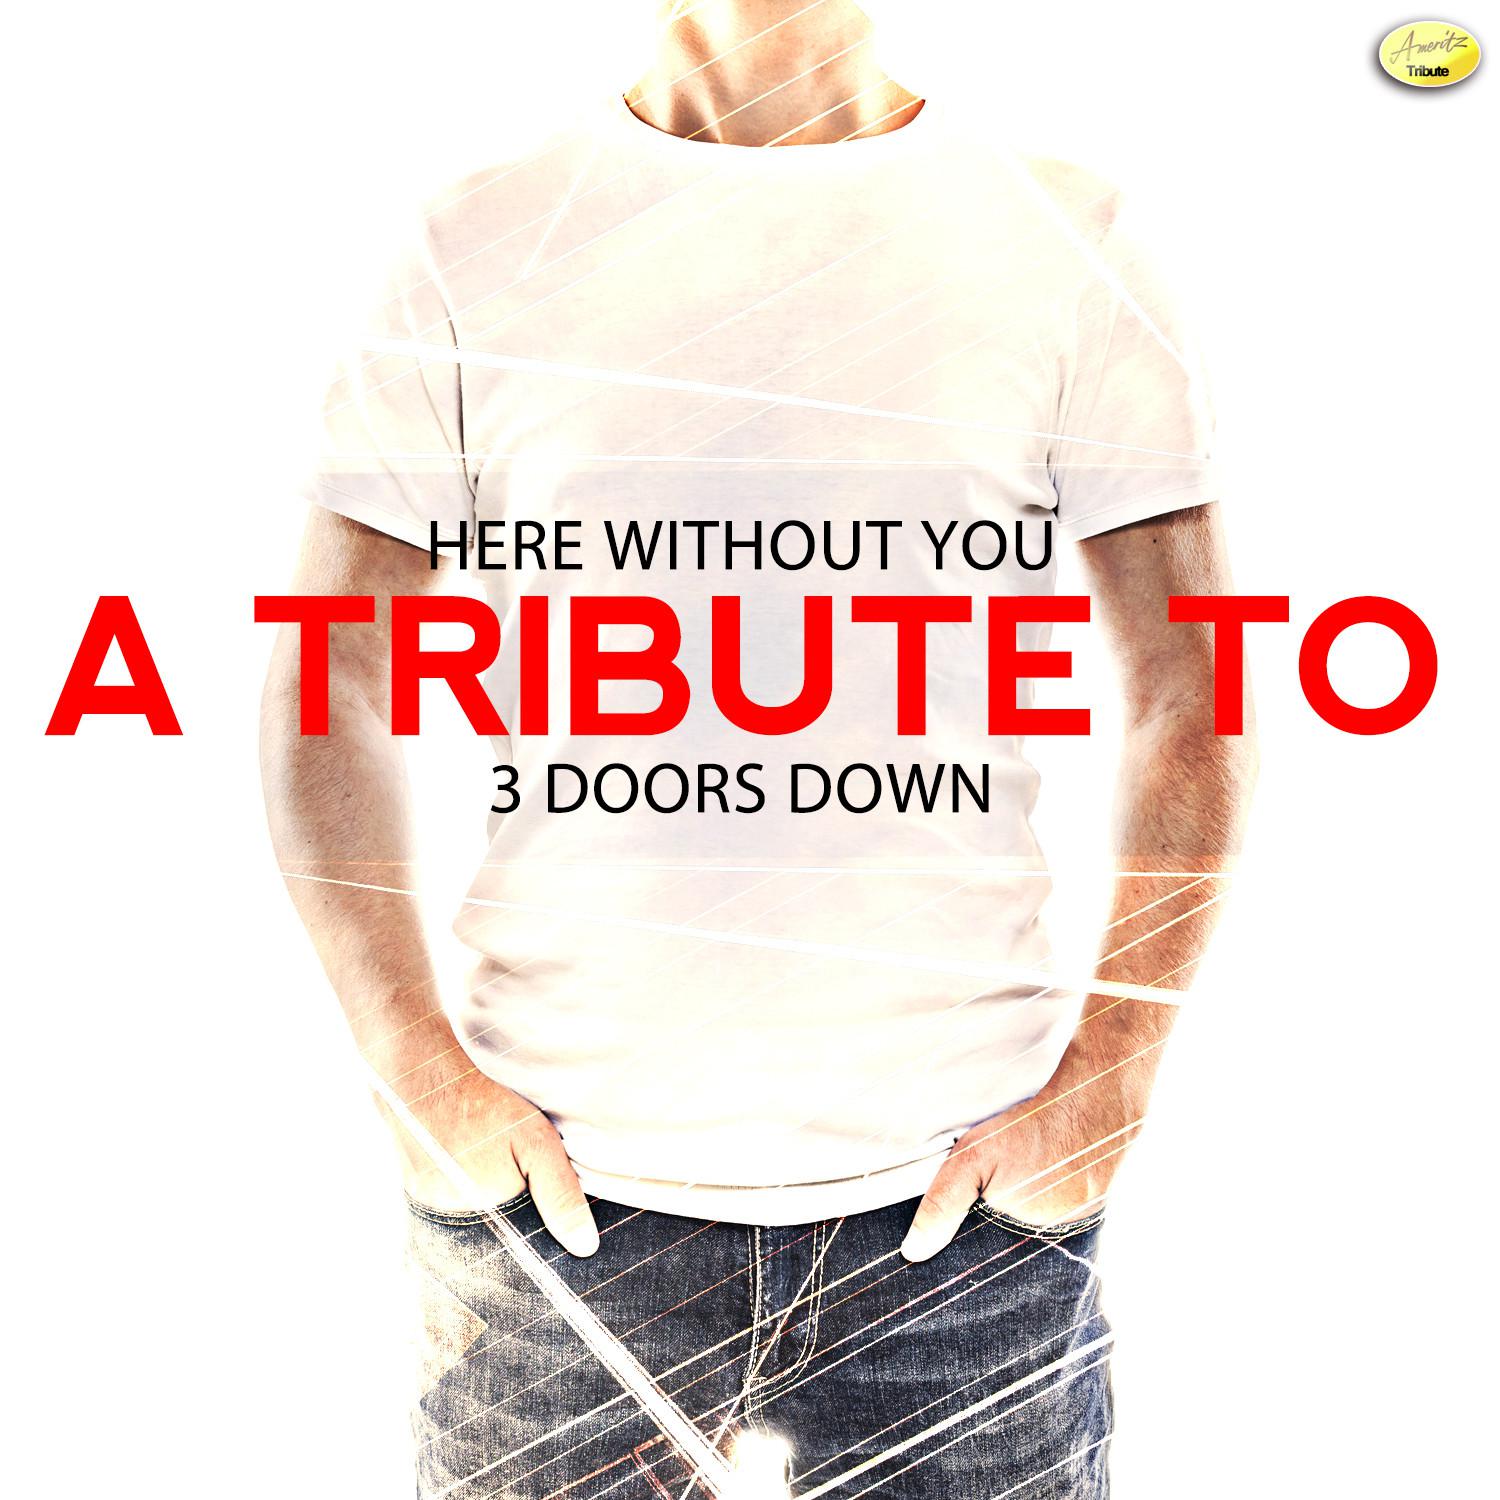 Here Without You - A Tribute 3 Doors Down - Single